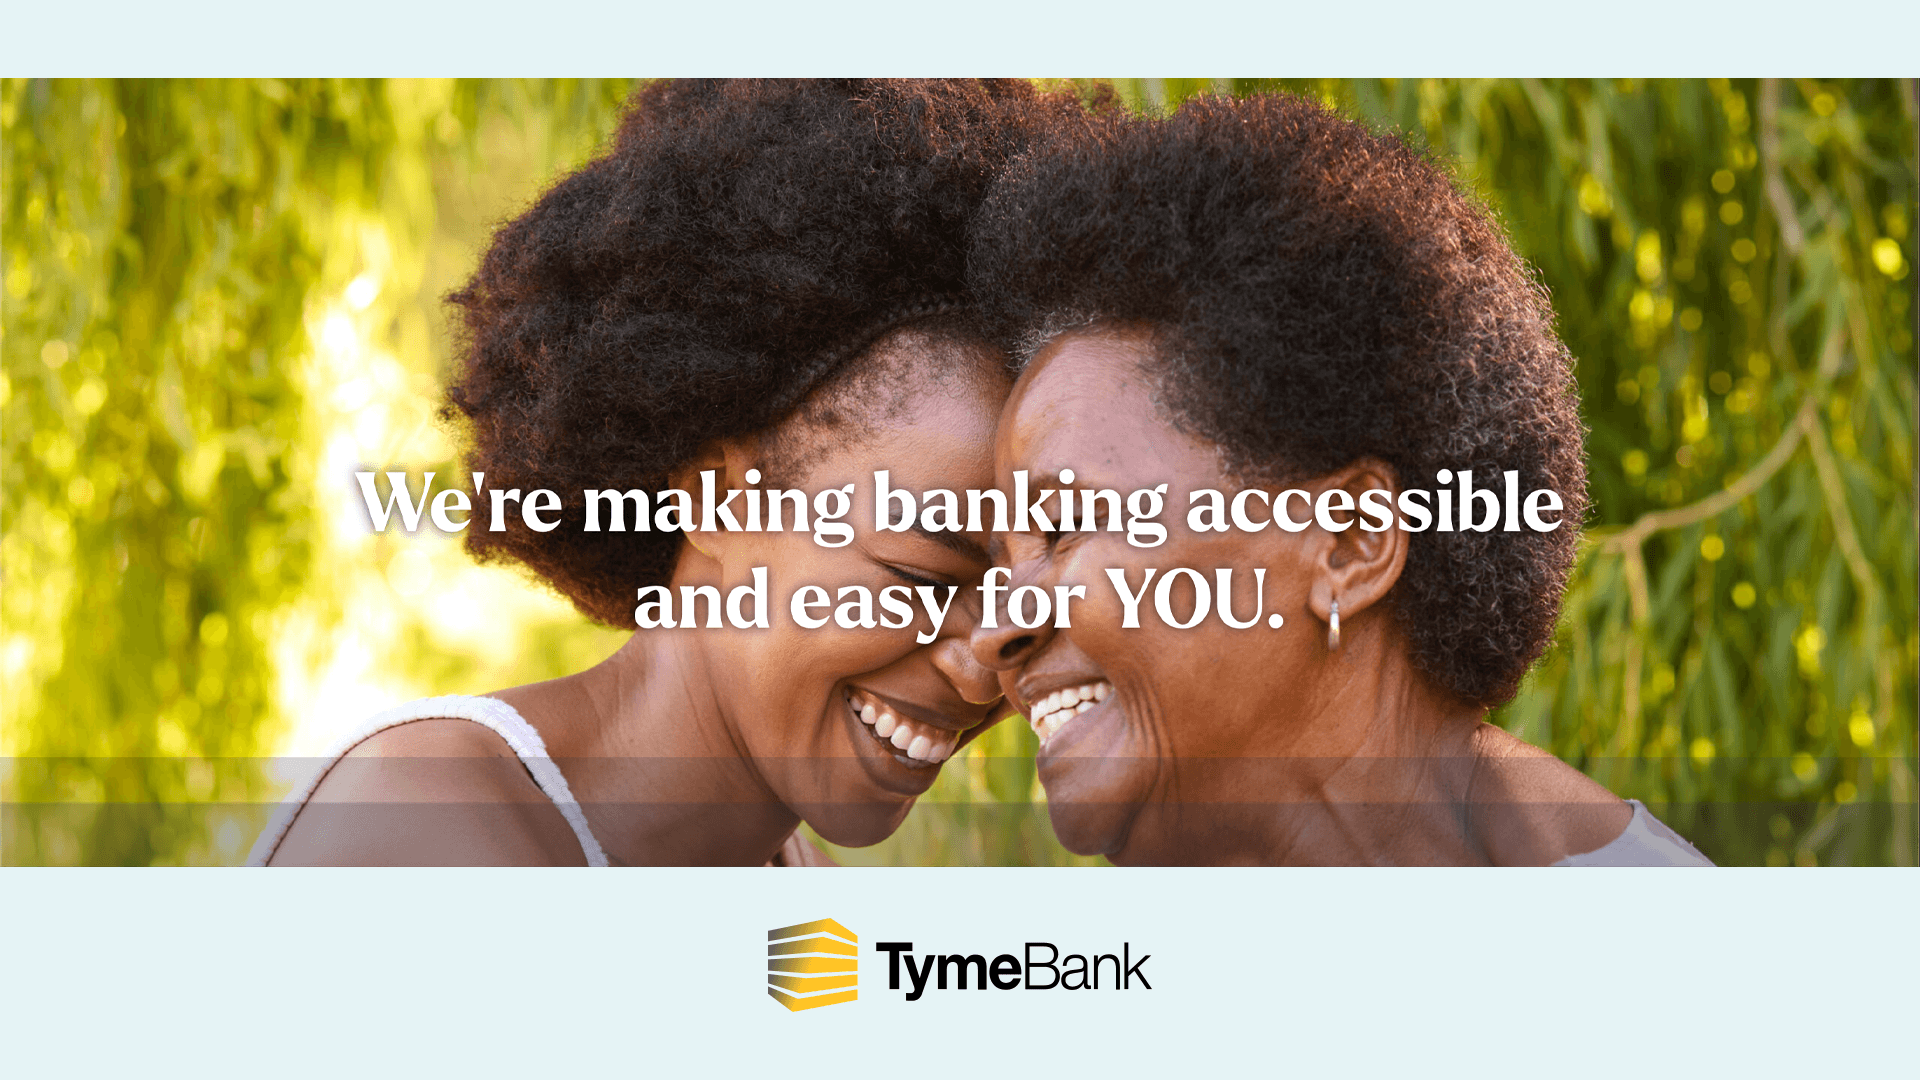 GoTyme Bank’s parent company Tyme Group delivers the world’s fastest profitable standalone digital bank in South Africa